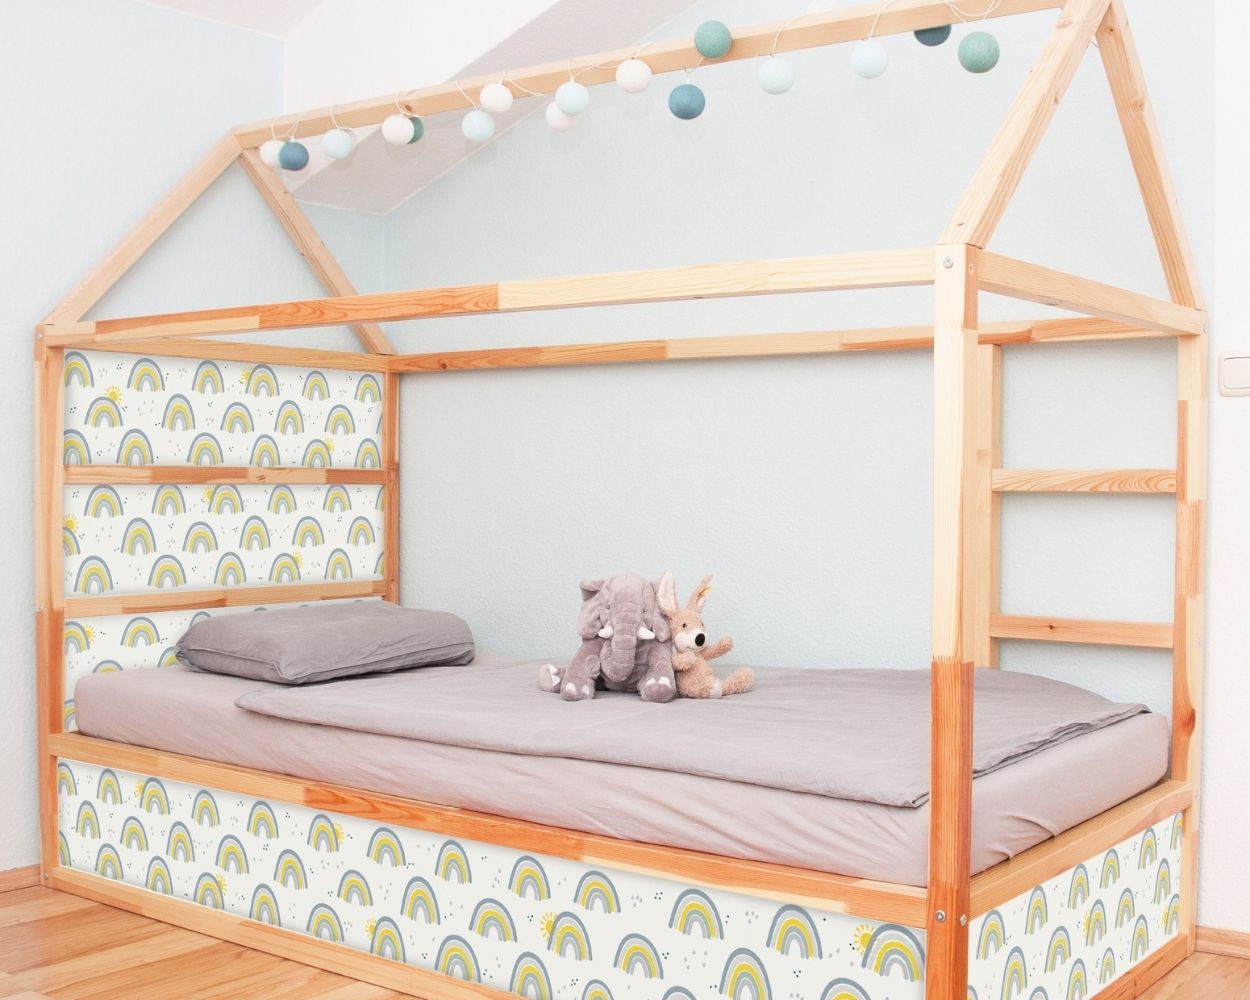 IKEA House bed: the best ideas for sleeping under the roof